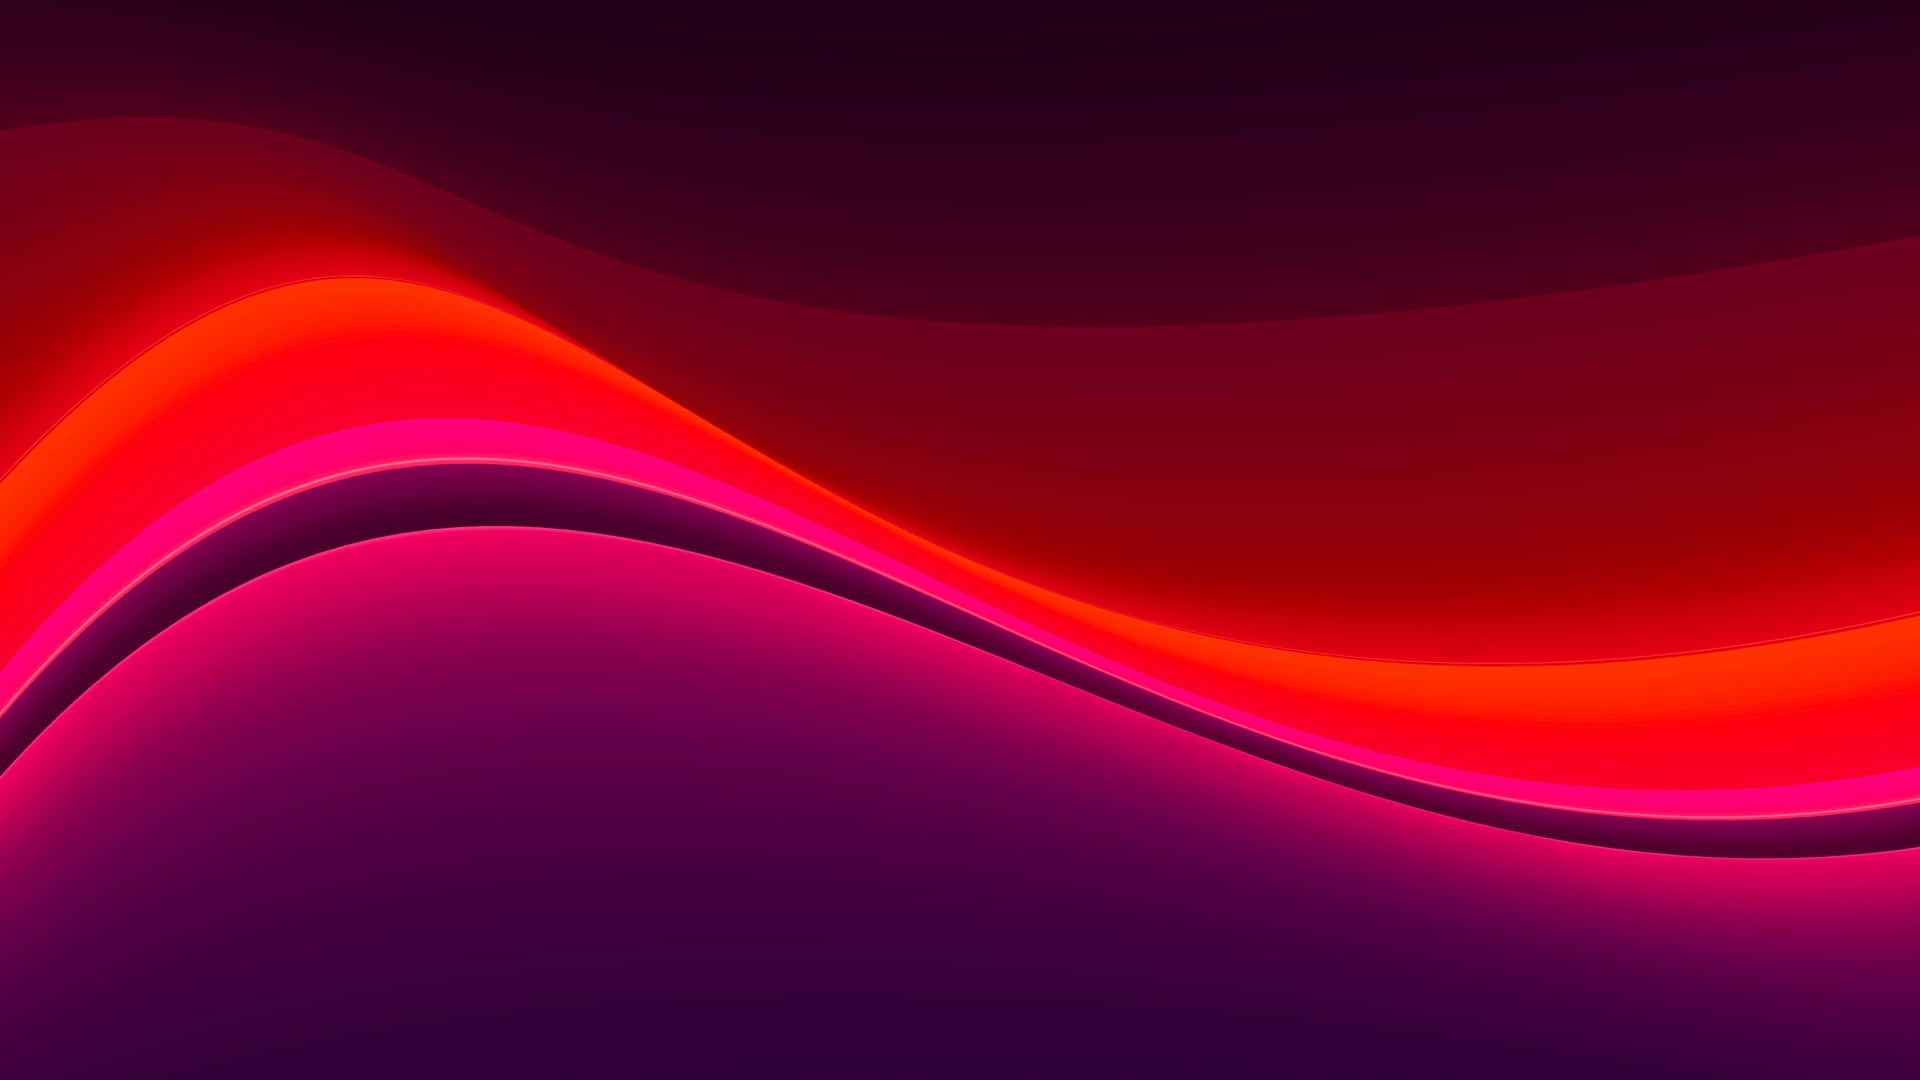 Vibrant Purpleand Red Gradient Waves Wallpaper